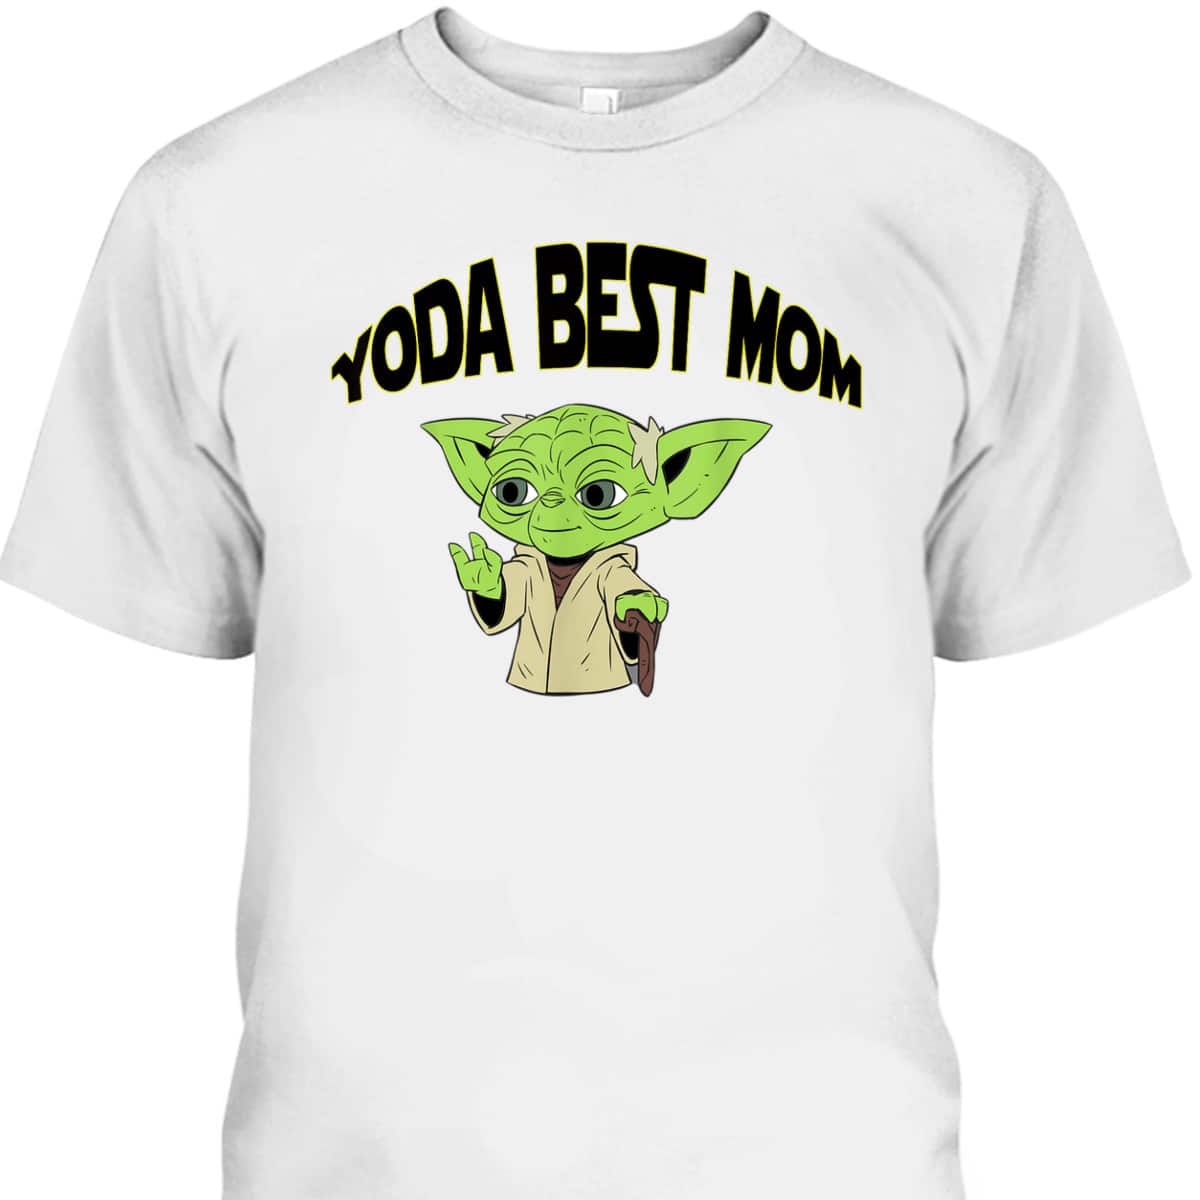 Yoda Best Mom Mother's Day T-Shirt Gift For Star Wars Fans